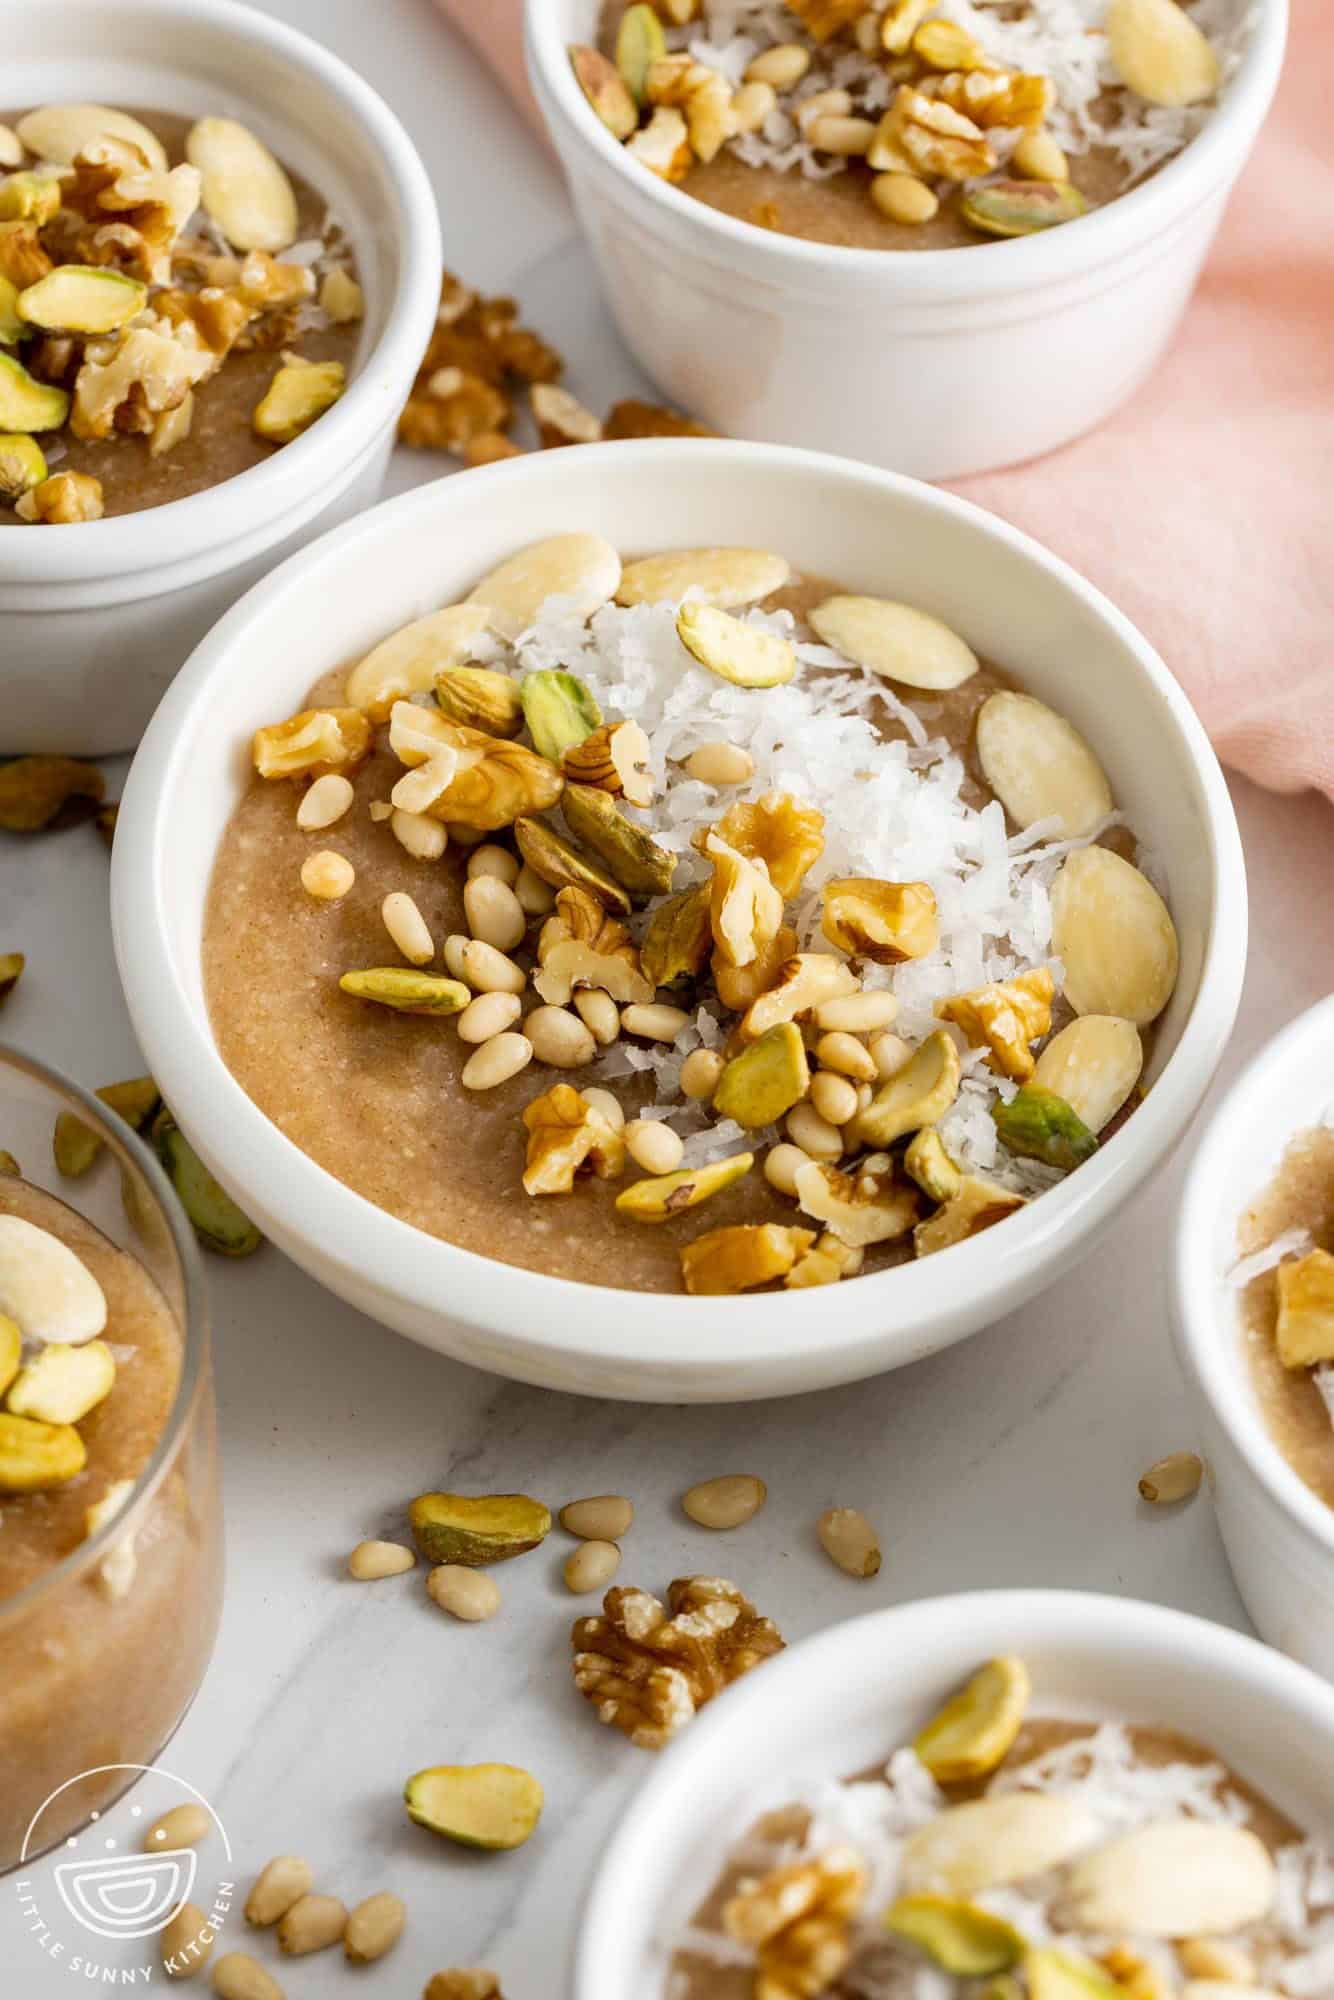 Meghli caraway pudding served in small white bowls, topped with coconut and nuts